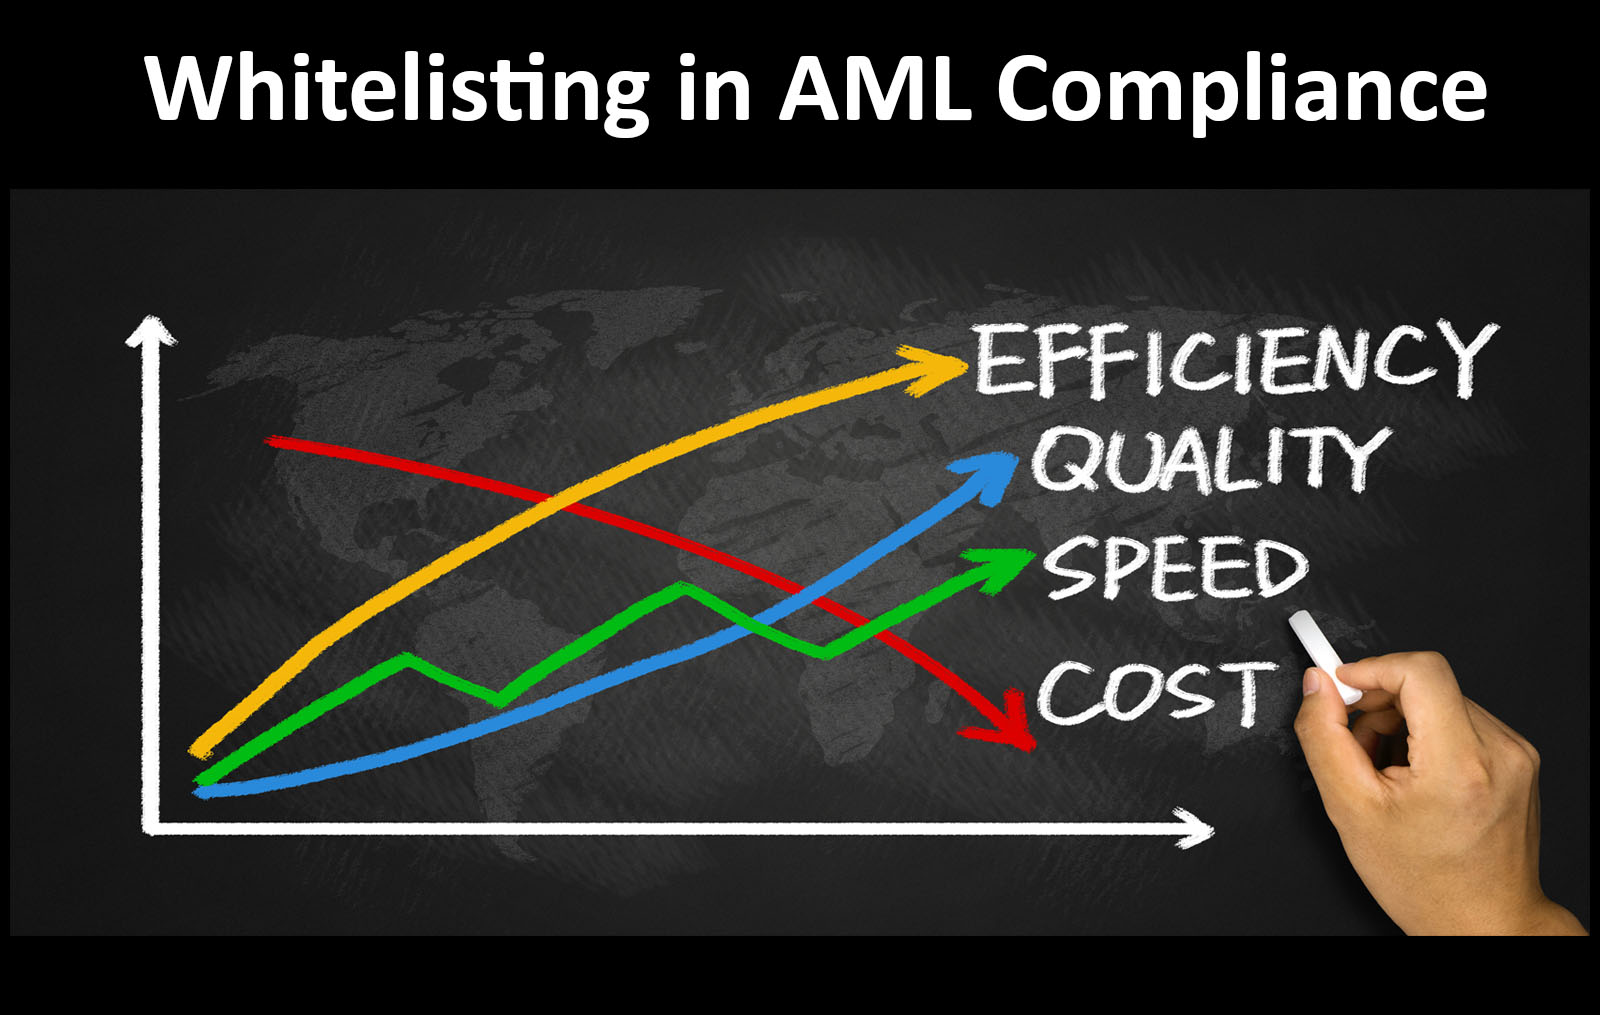 This illustration relates to whitelisting in AML Compliance and OFAC Compliance. The art shows a graph with improvements in efficiency, quality, and speed, and it shows a decline in cost. Whitelisting of false positives in monitoring and screening elevates efficiency, as shown in this art.